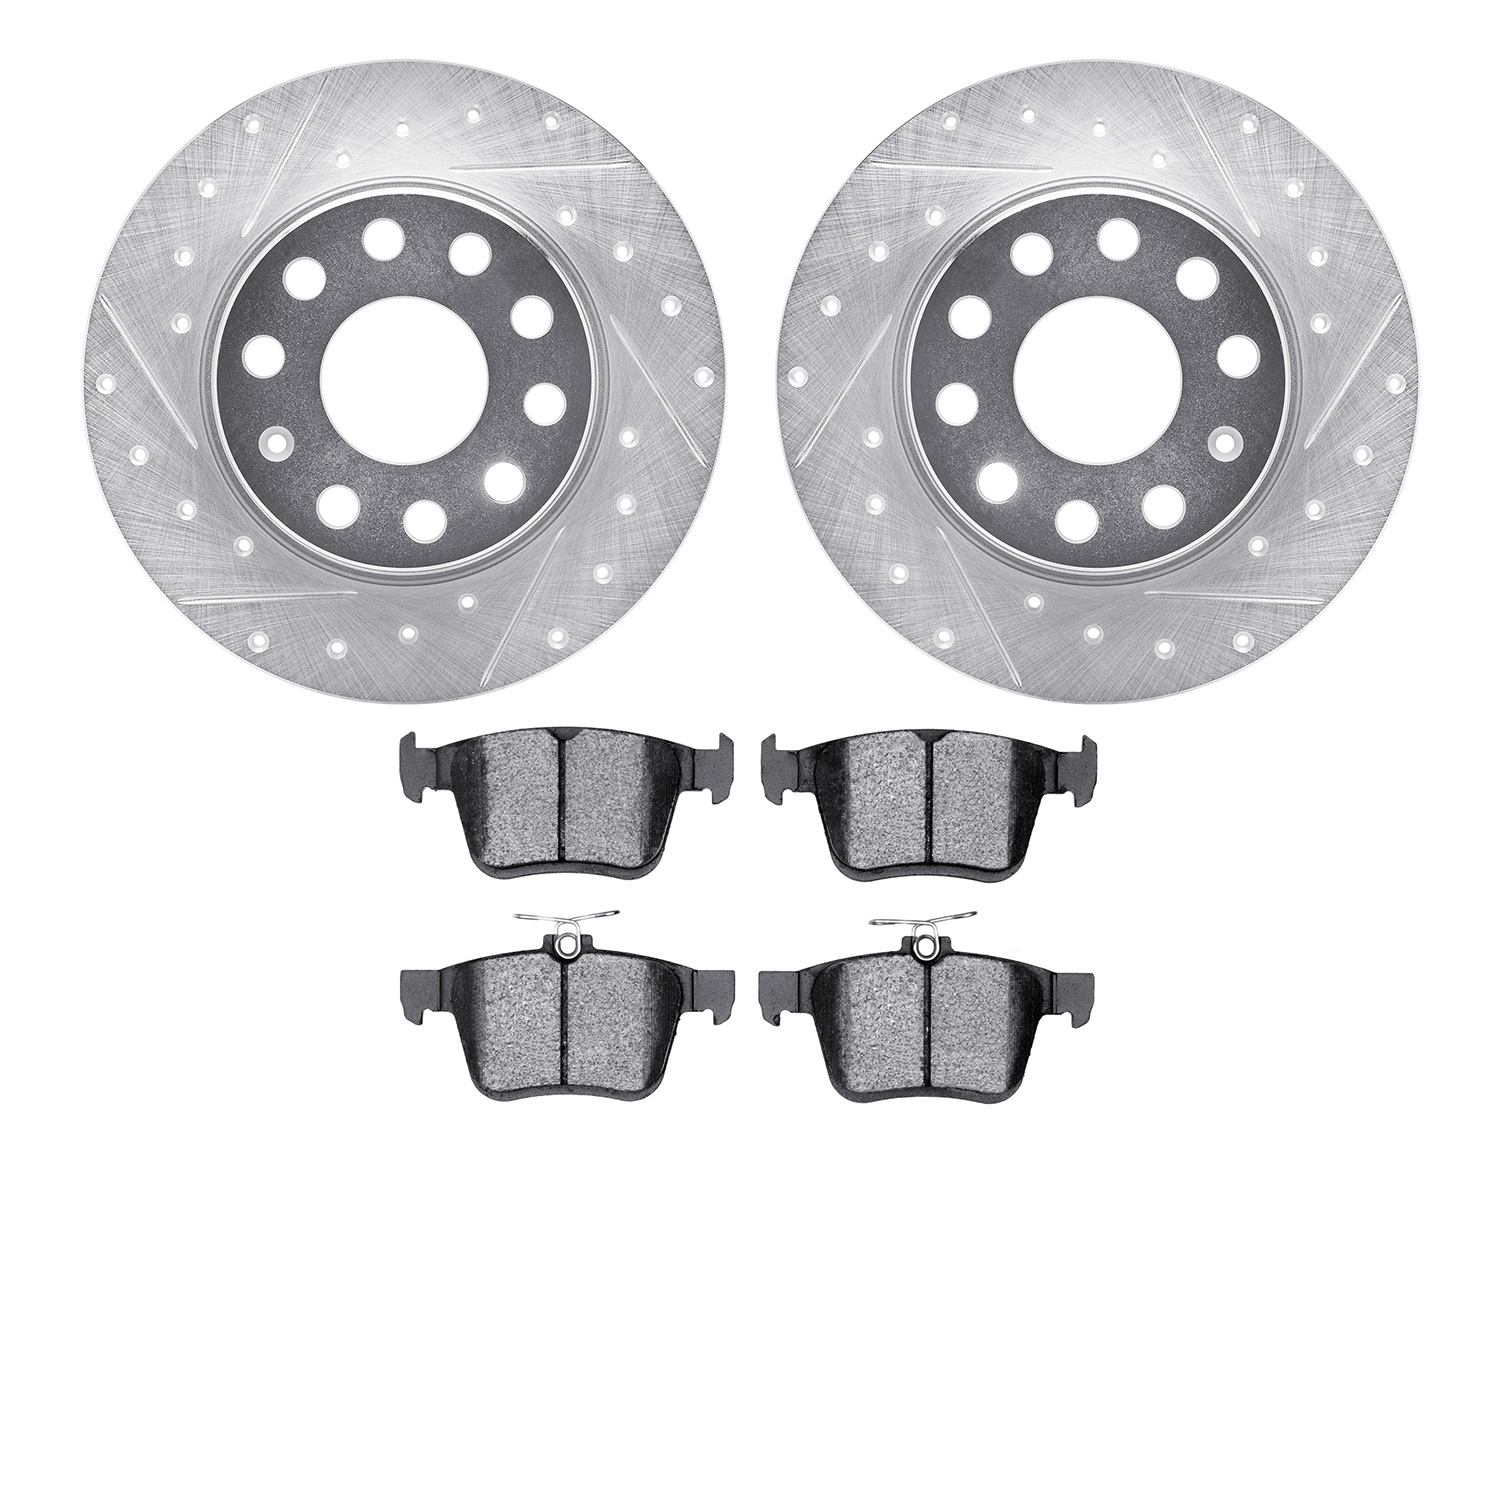 7602-74062 Drilled/Slotted Brake Rotors w/5000 Euro Ceramic Brake Pads Kit [Silver], Fits Select Audi/Volkswagen, Position: Rear